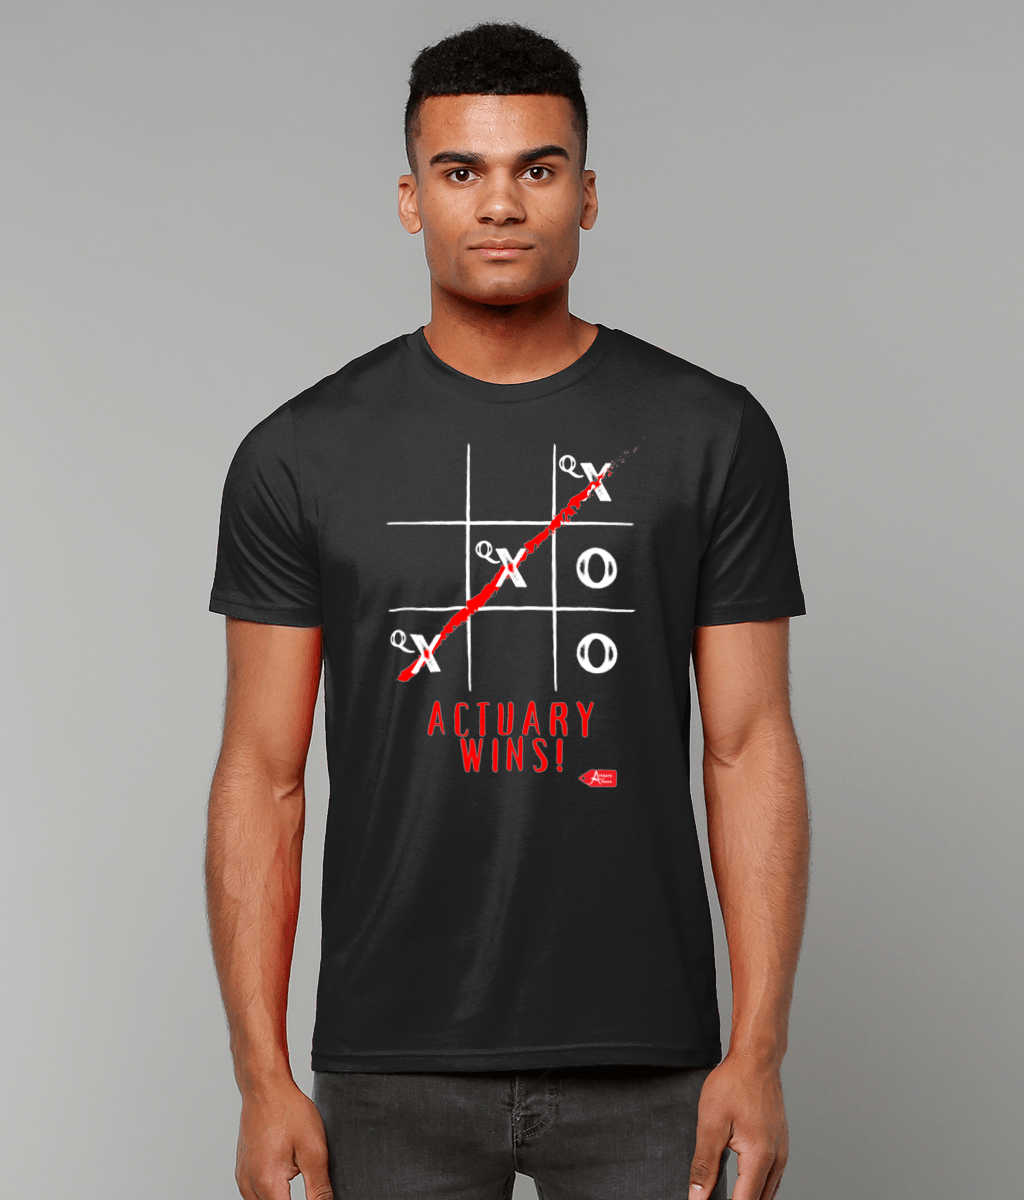 Actuary Wins Nought and Crosses Qx T-Shirt